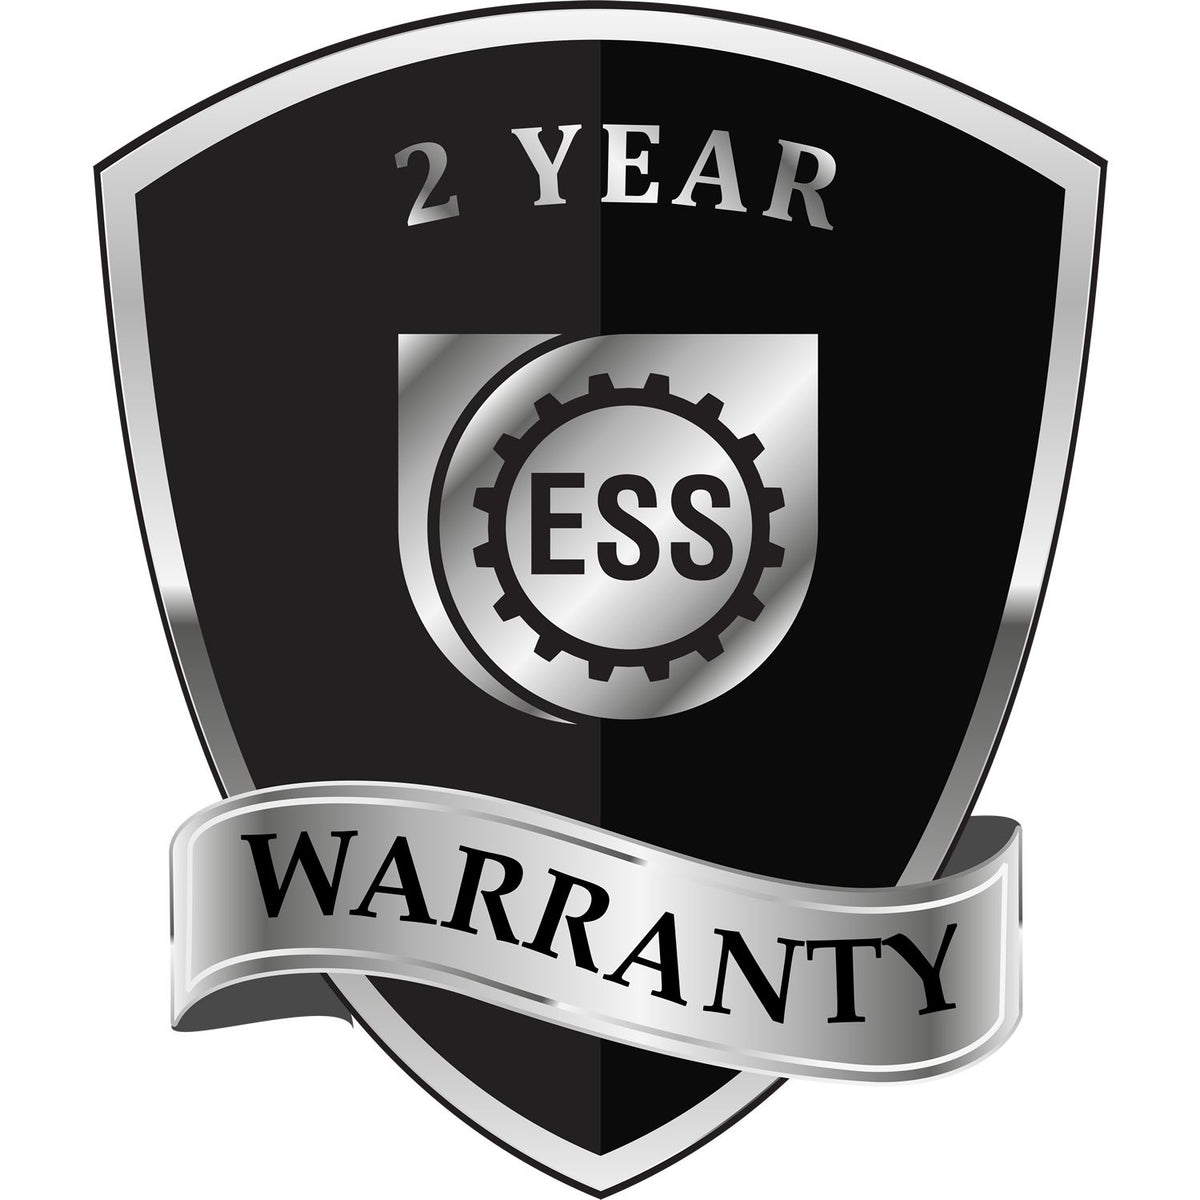 A badge or emblem showing a warranty icon for the Illinois Engineer Desk Seal